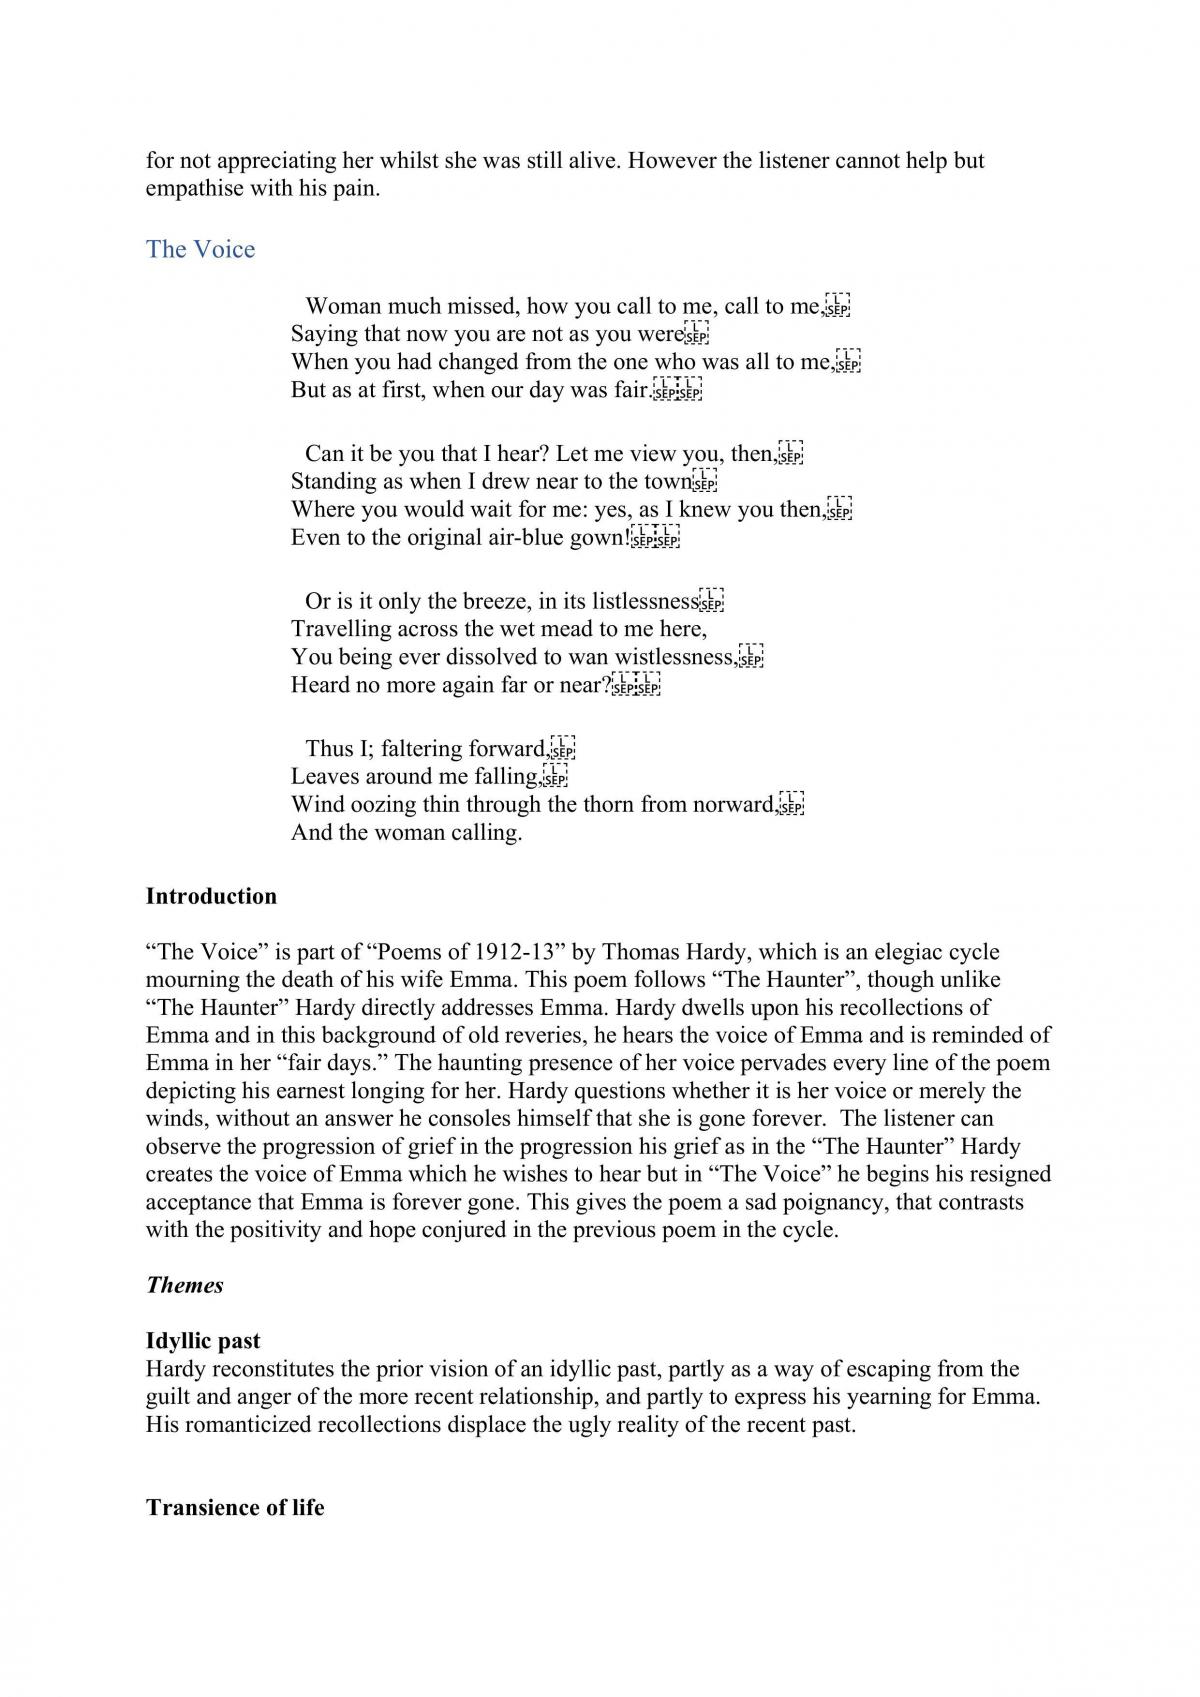 Study of Thomas Hardy's Poetry - IOC complete comprehensive notes - Page 23